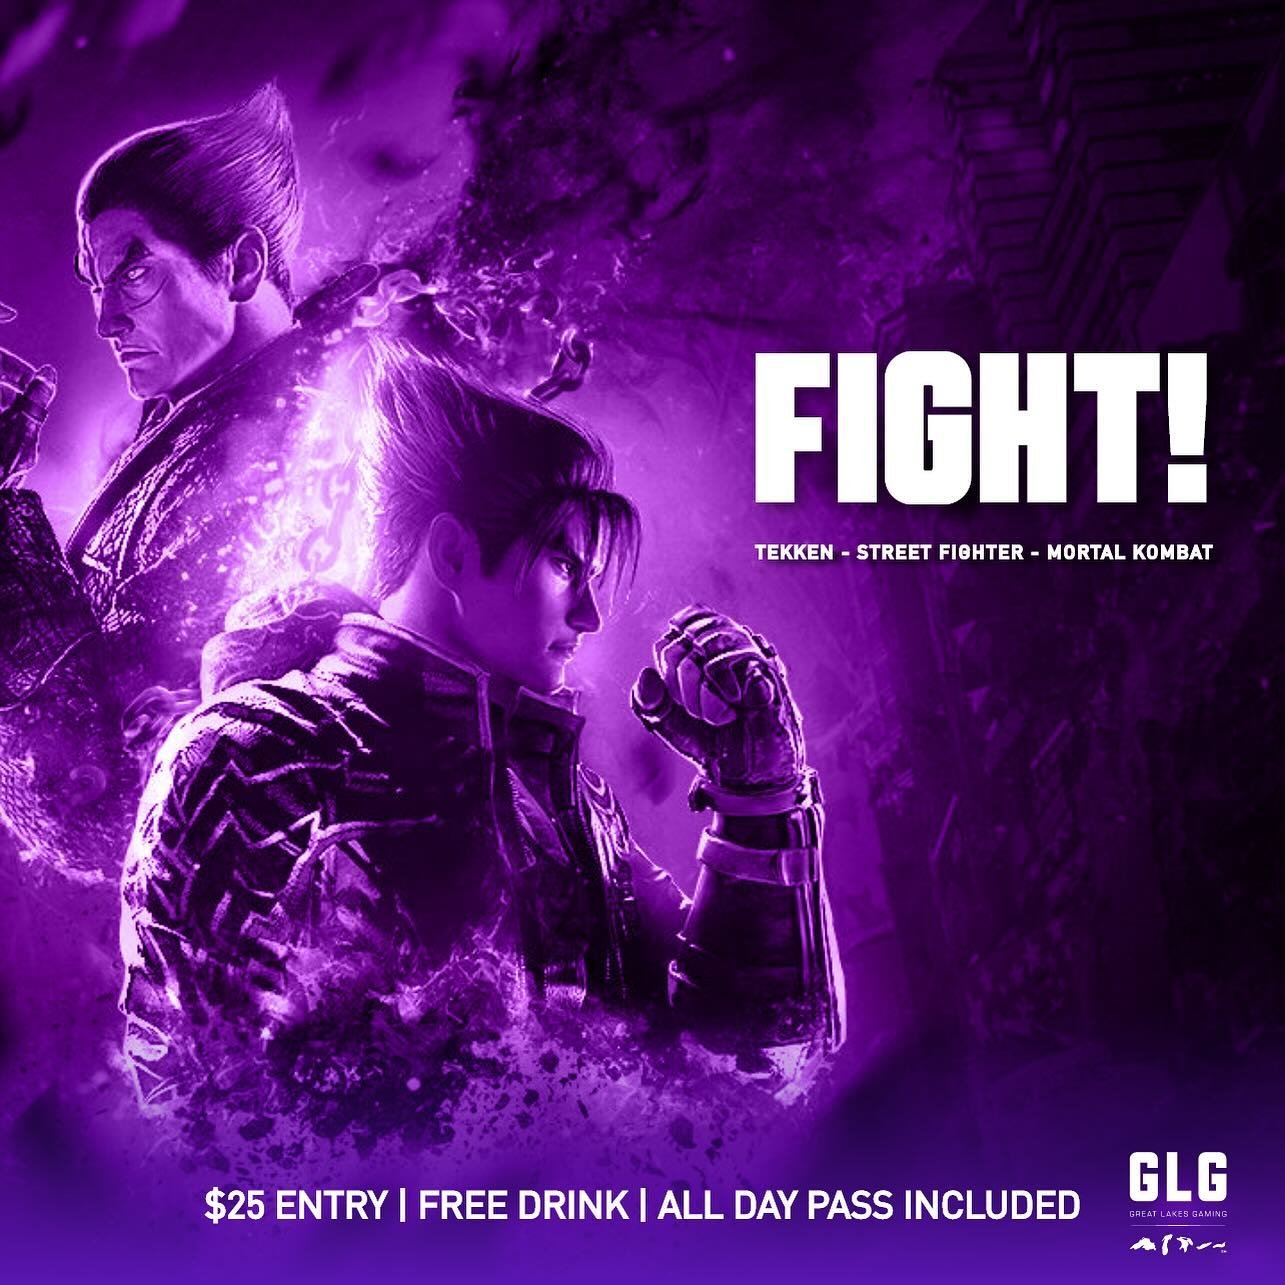 Friday, May 31st, we&rsquo;re hosting fighting games like Tekken, Mortal Kombat and Street Fighter!
Sign up for some competition or just fun games against other lounge members!
Join our growing gaming community and let&rsquo;s have fun together at th